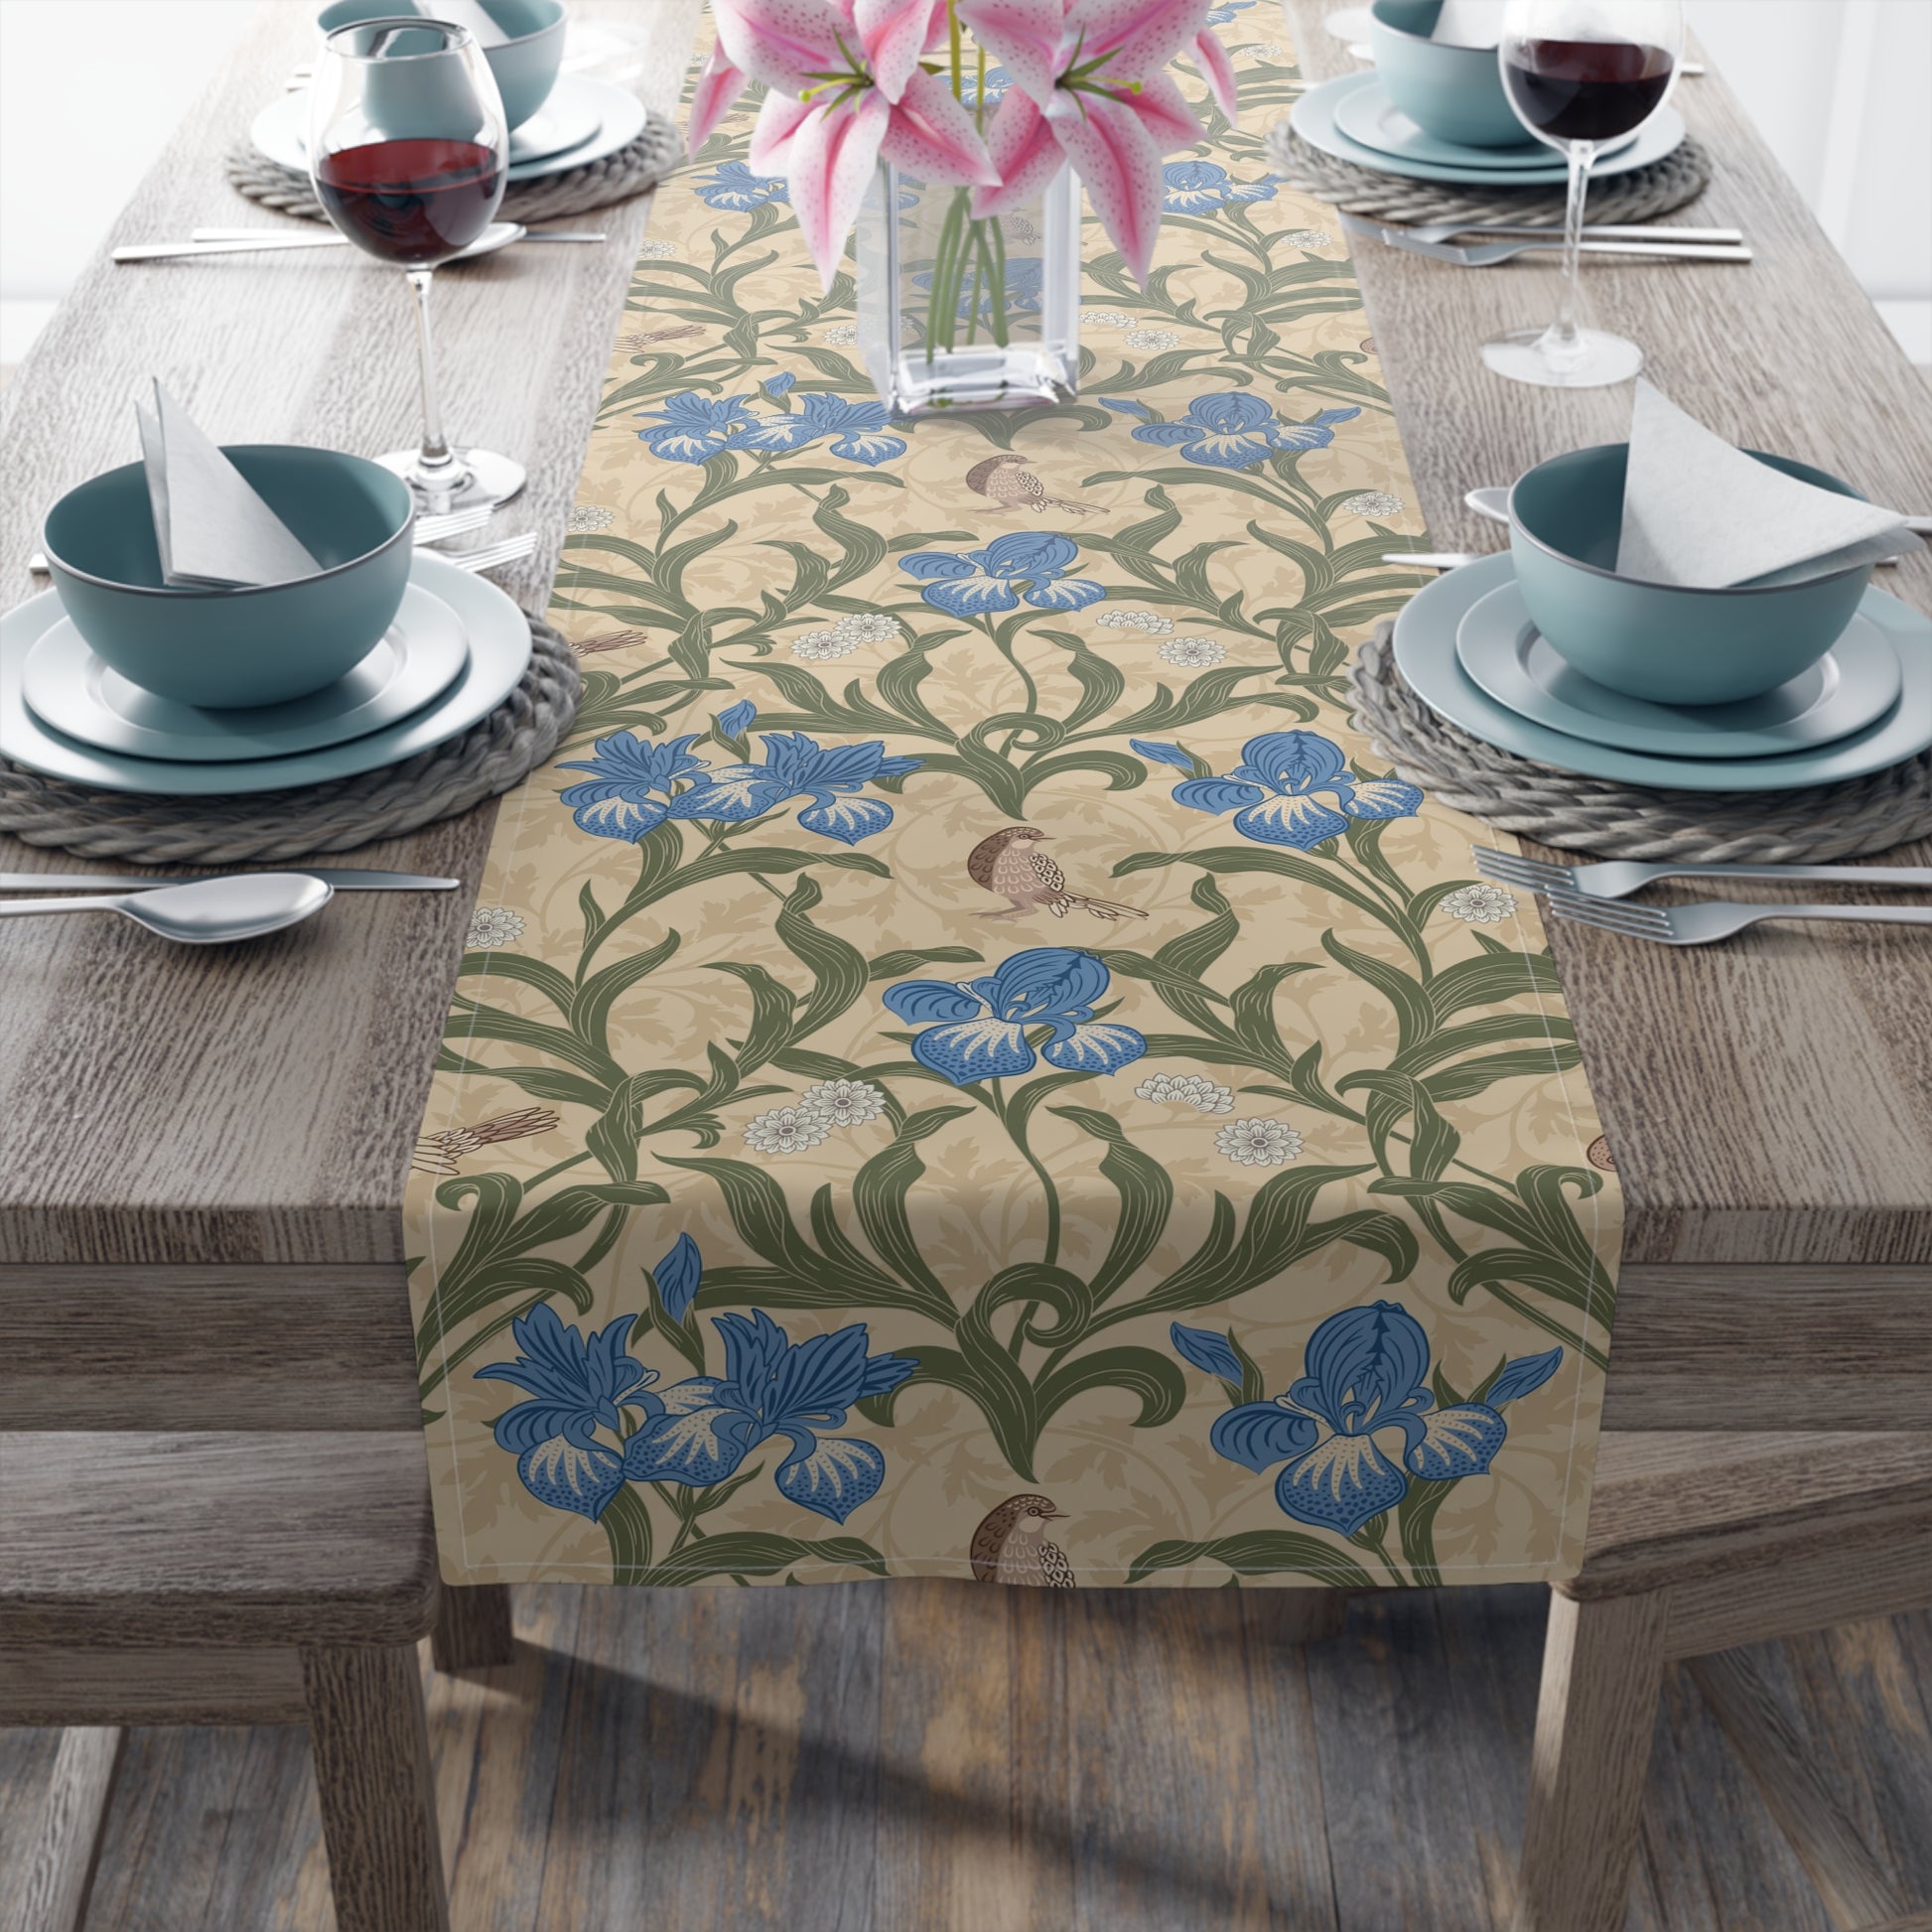 william-morris-co-table-runner-blue-iris-collection-3